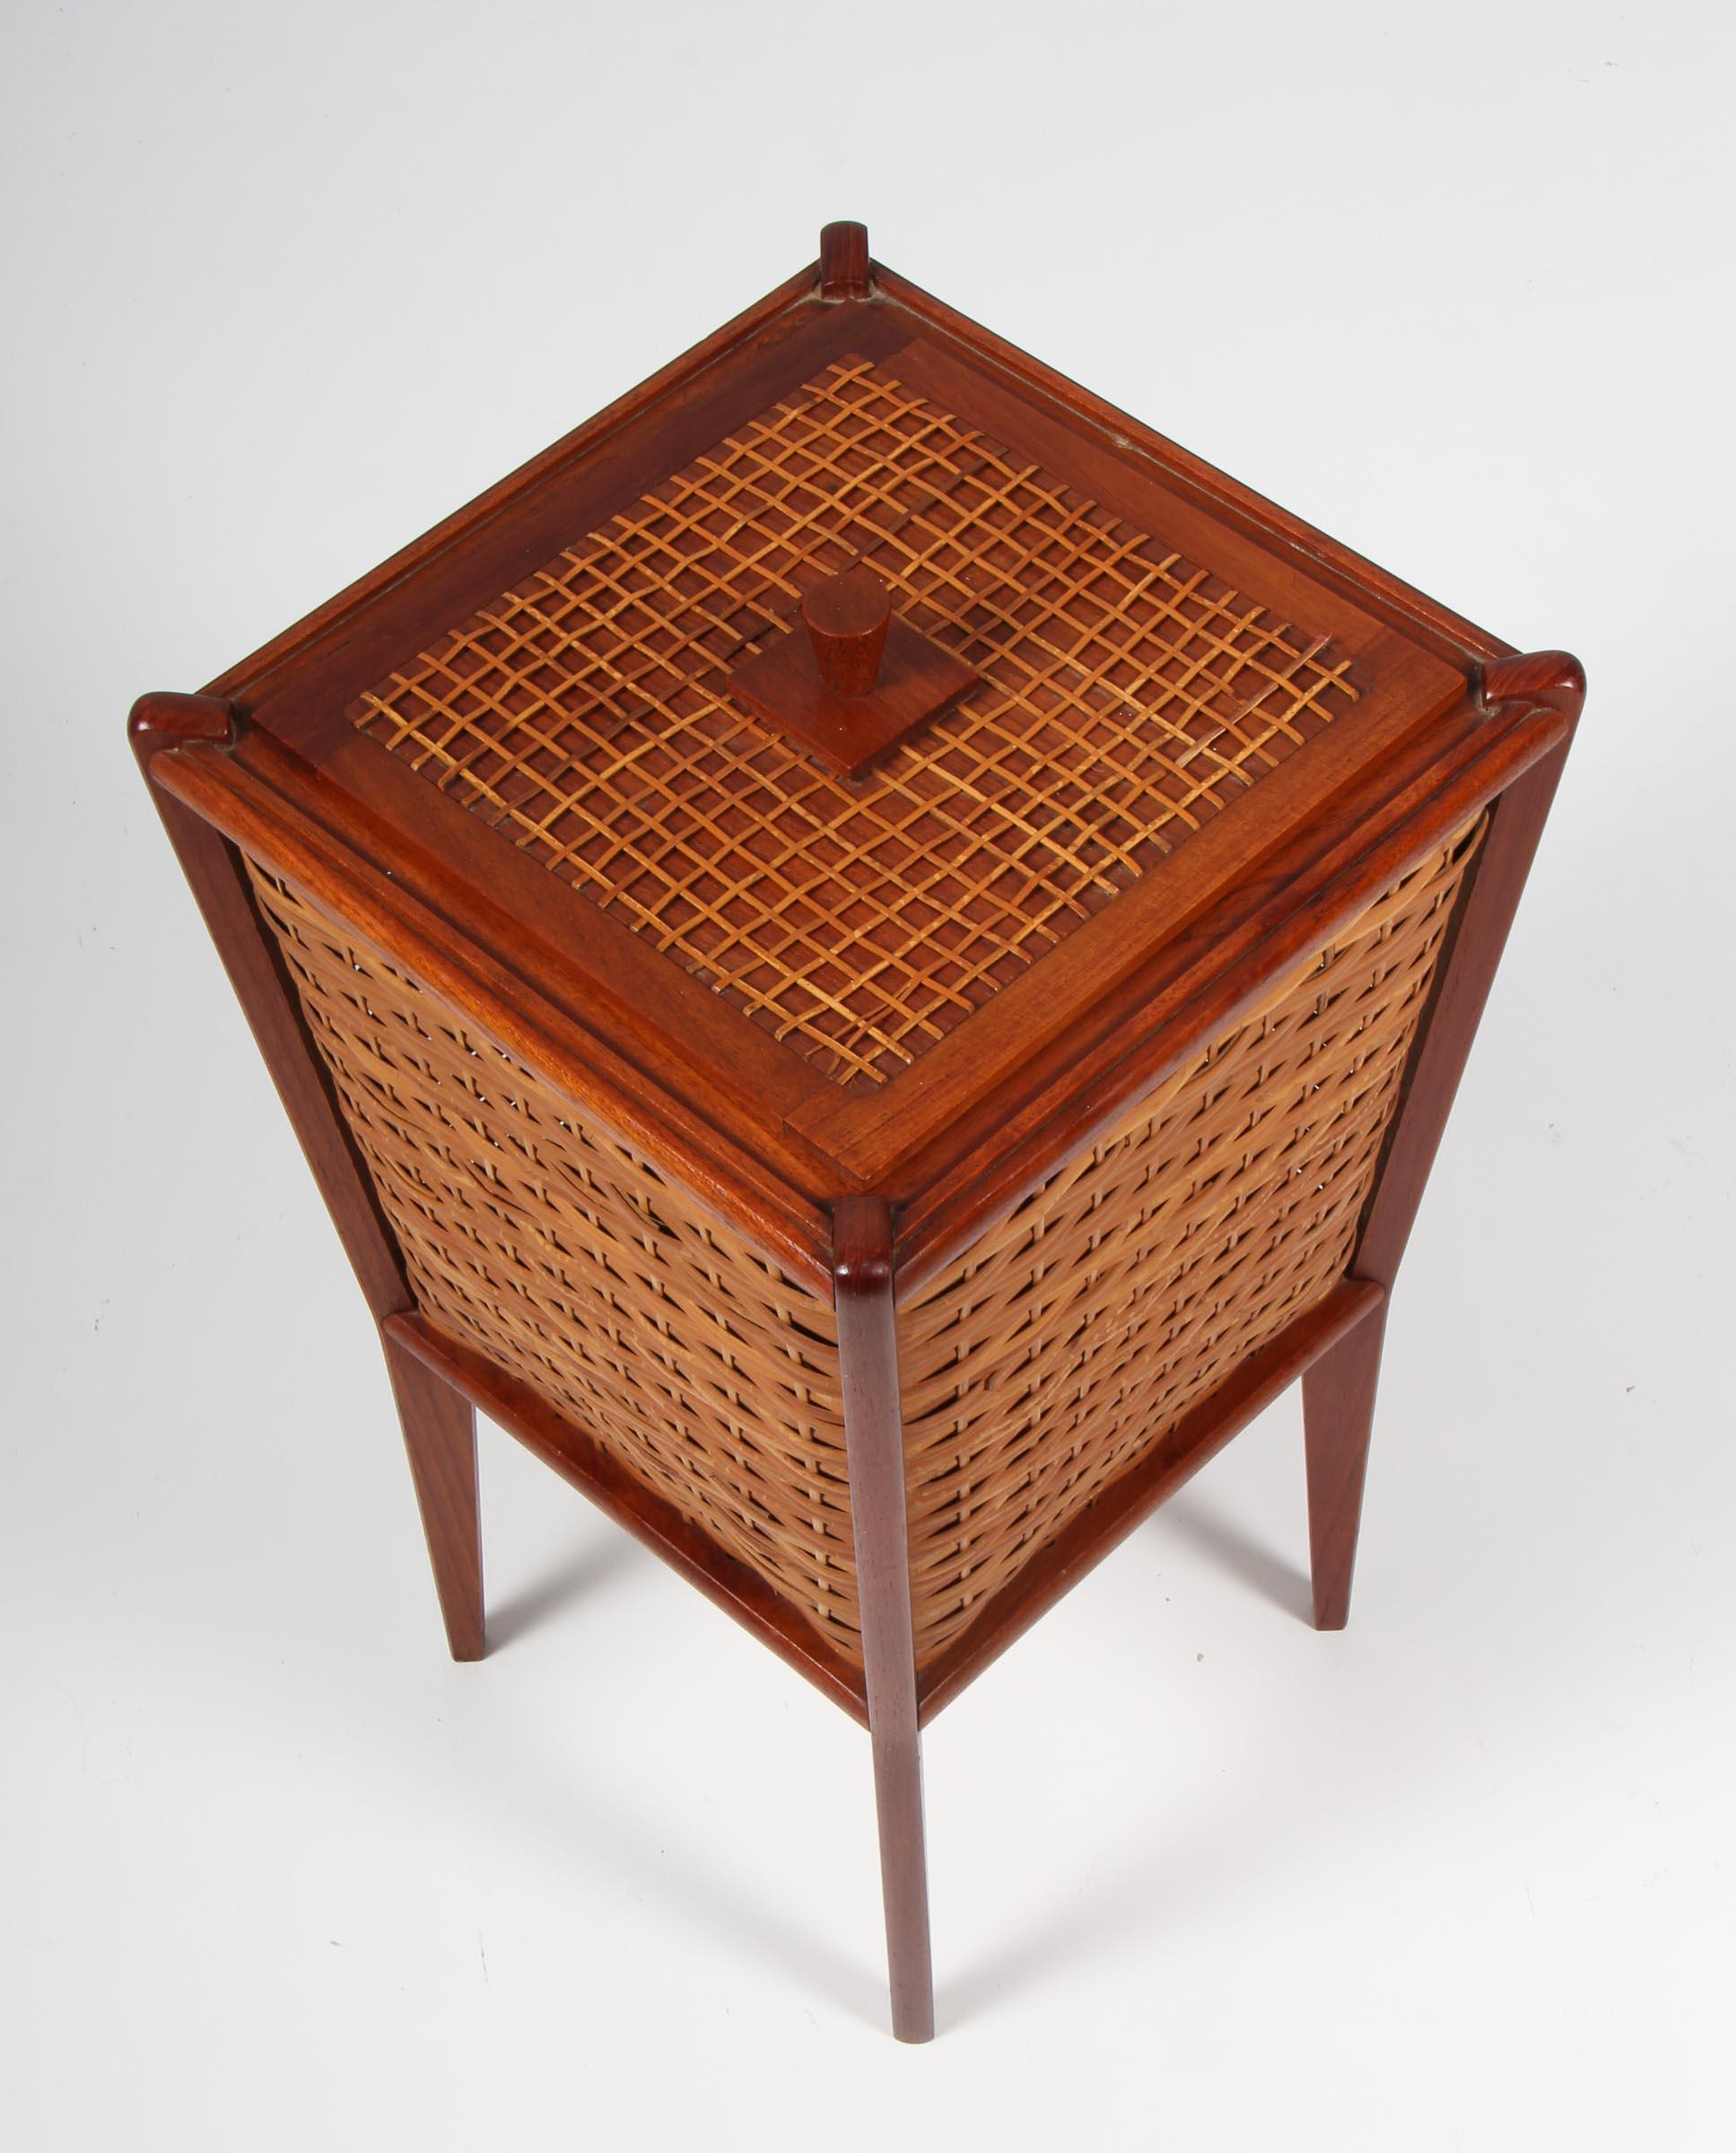 Danish cabinetmaker sewing nest with frame of teak. Sides and top with cane.

Made in the 1950's fantastic craftmanship and details.